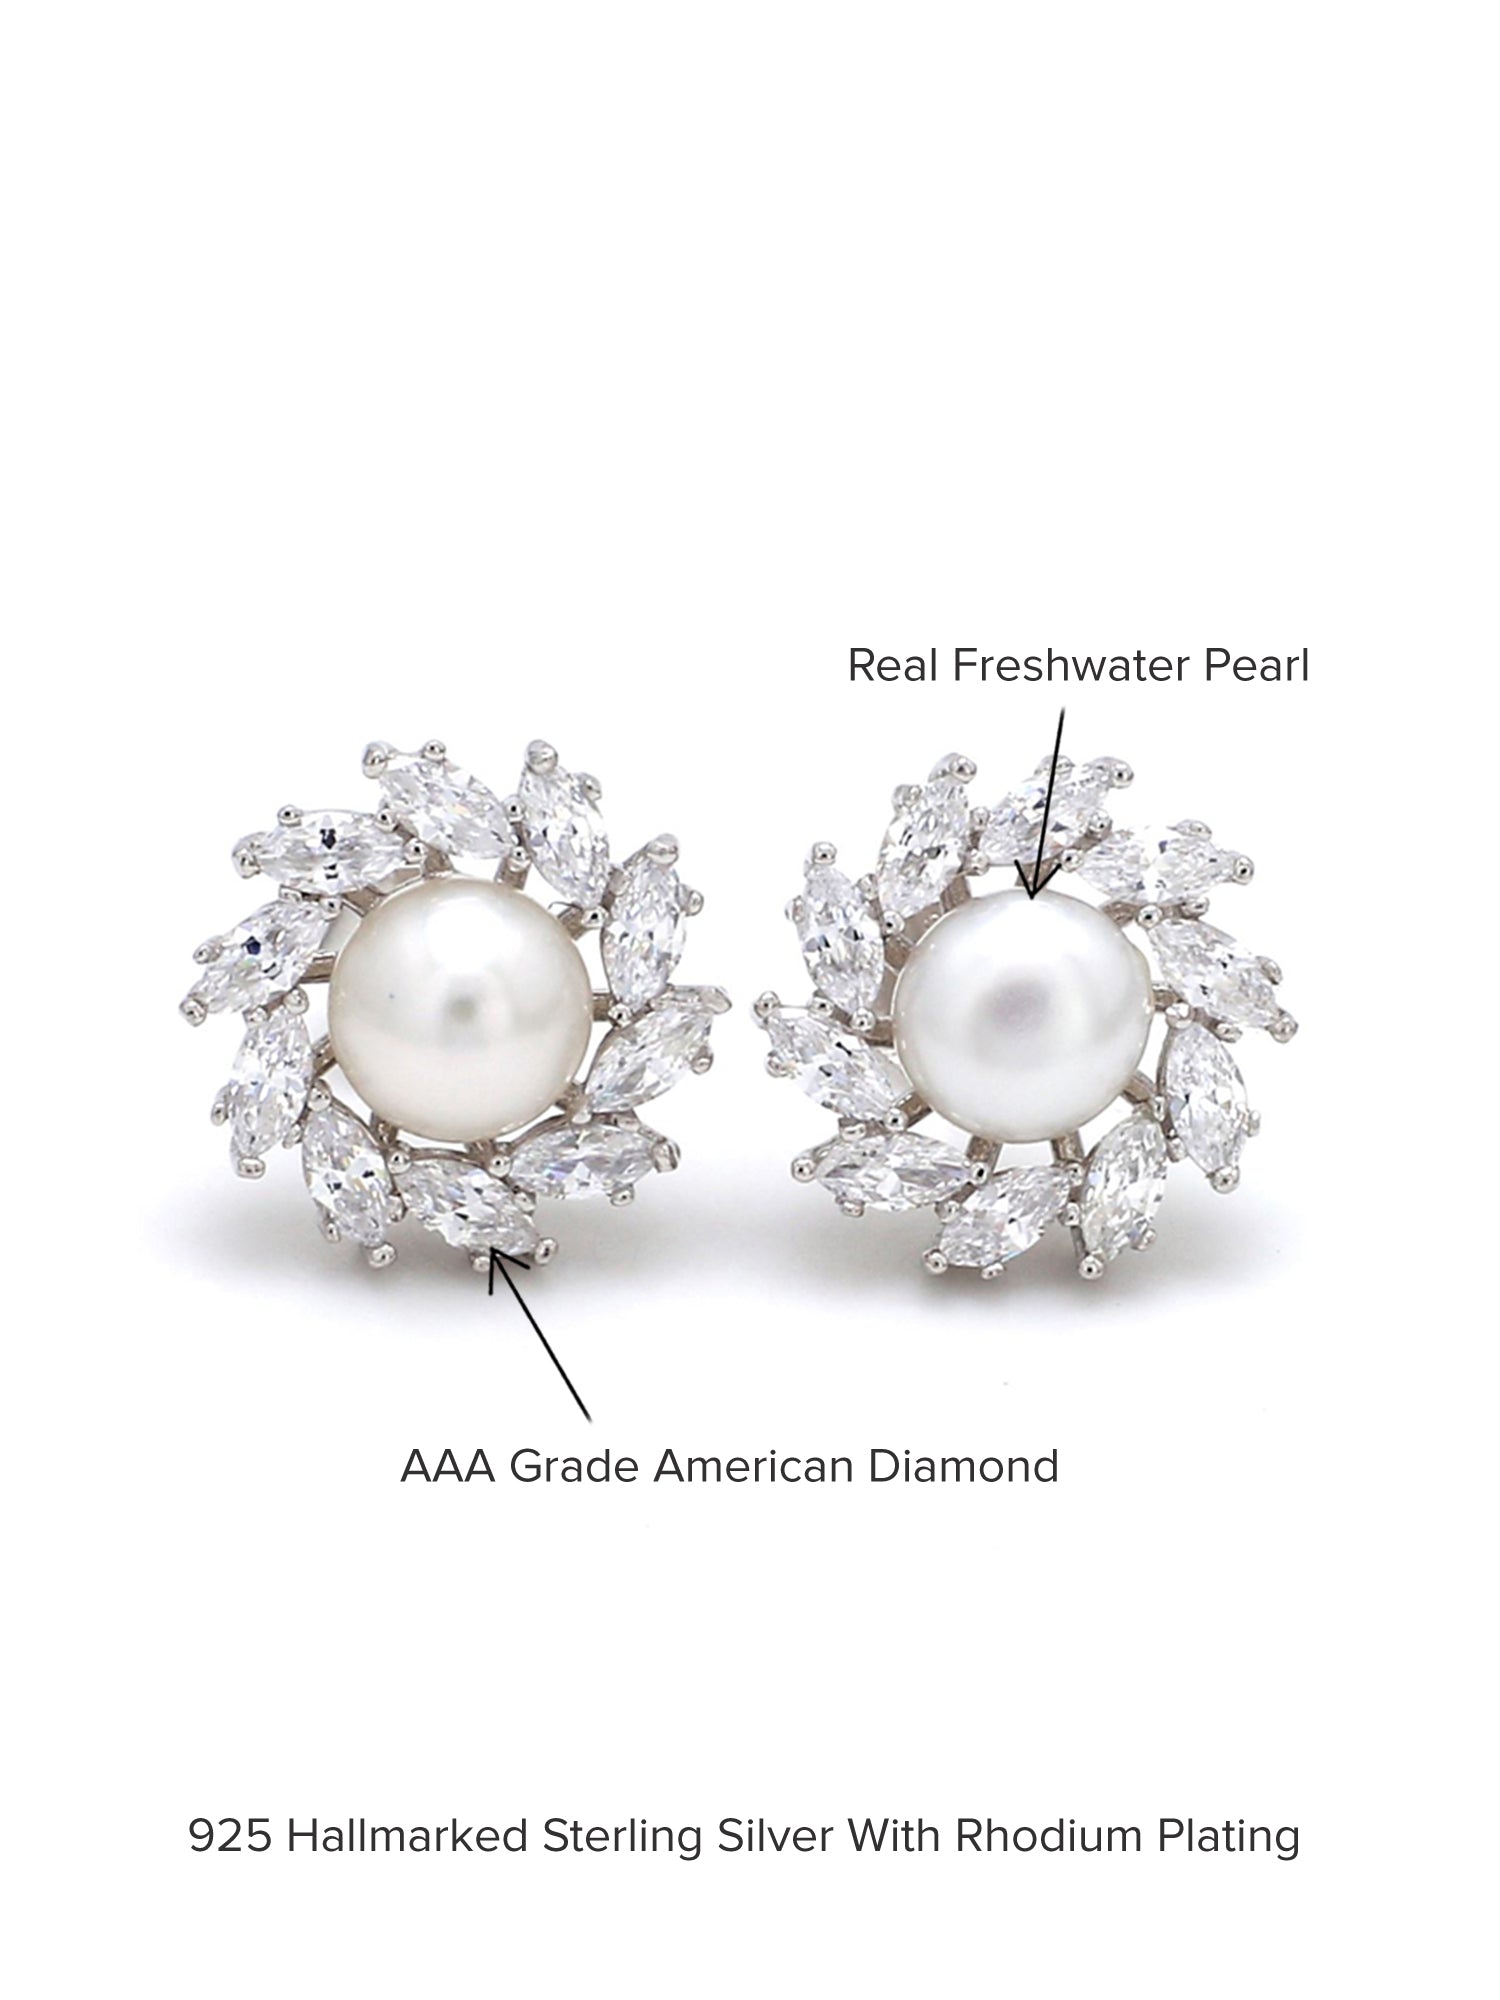 East India 14k Gold, Diamond and Pearl Earrings : Museum of Jewelry